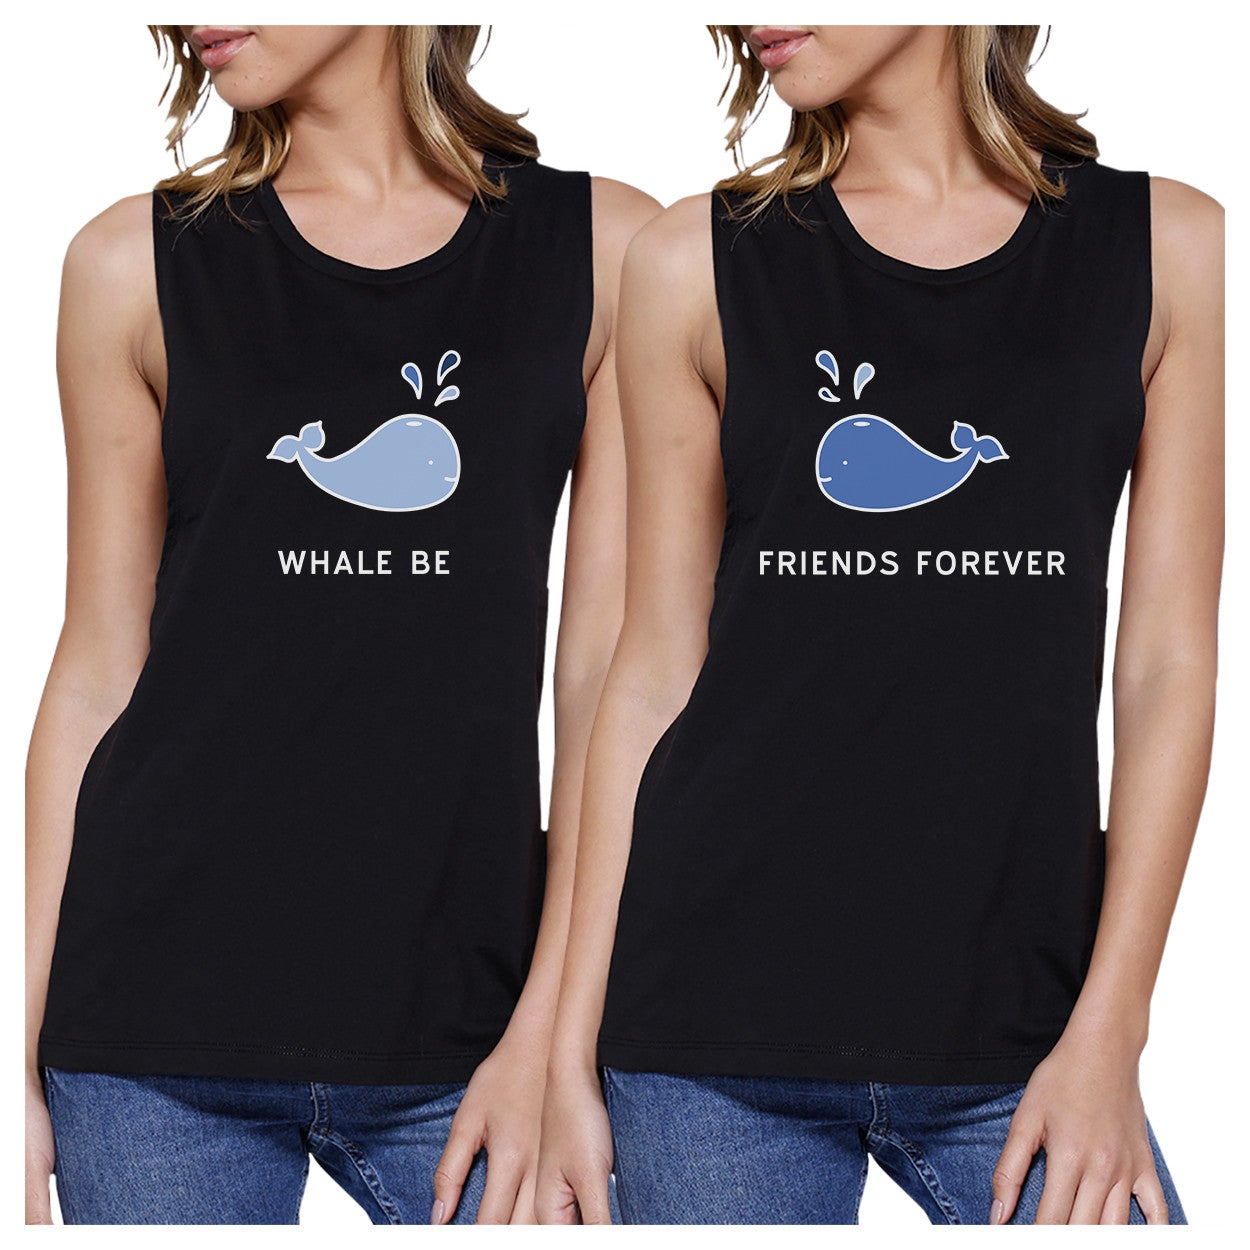 Whale Be Friend Forever BFF Matching Cute Summer Muscle Tee Shirt Black